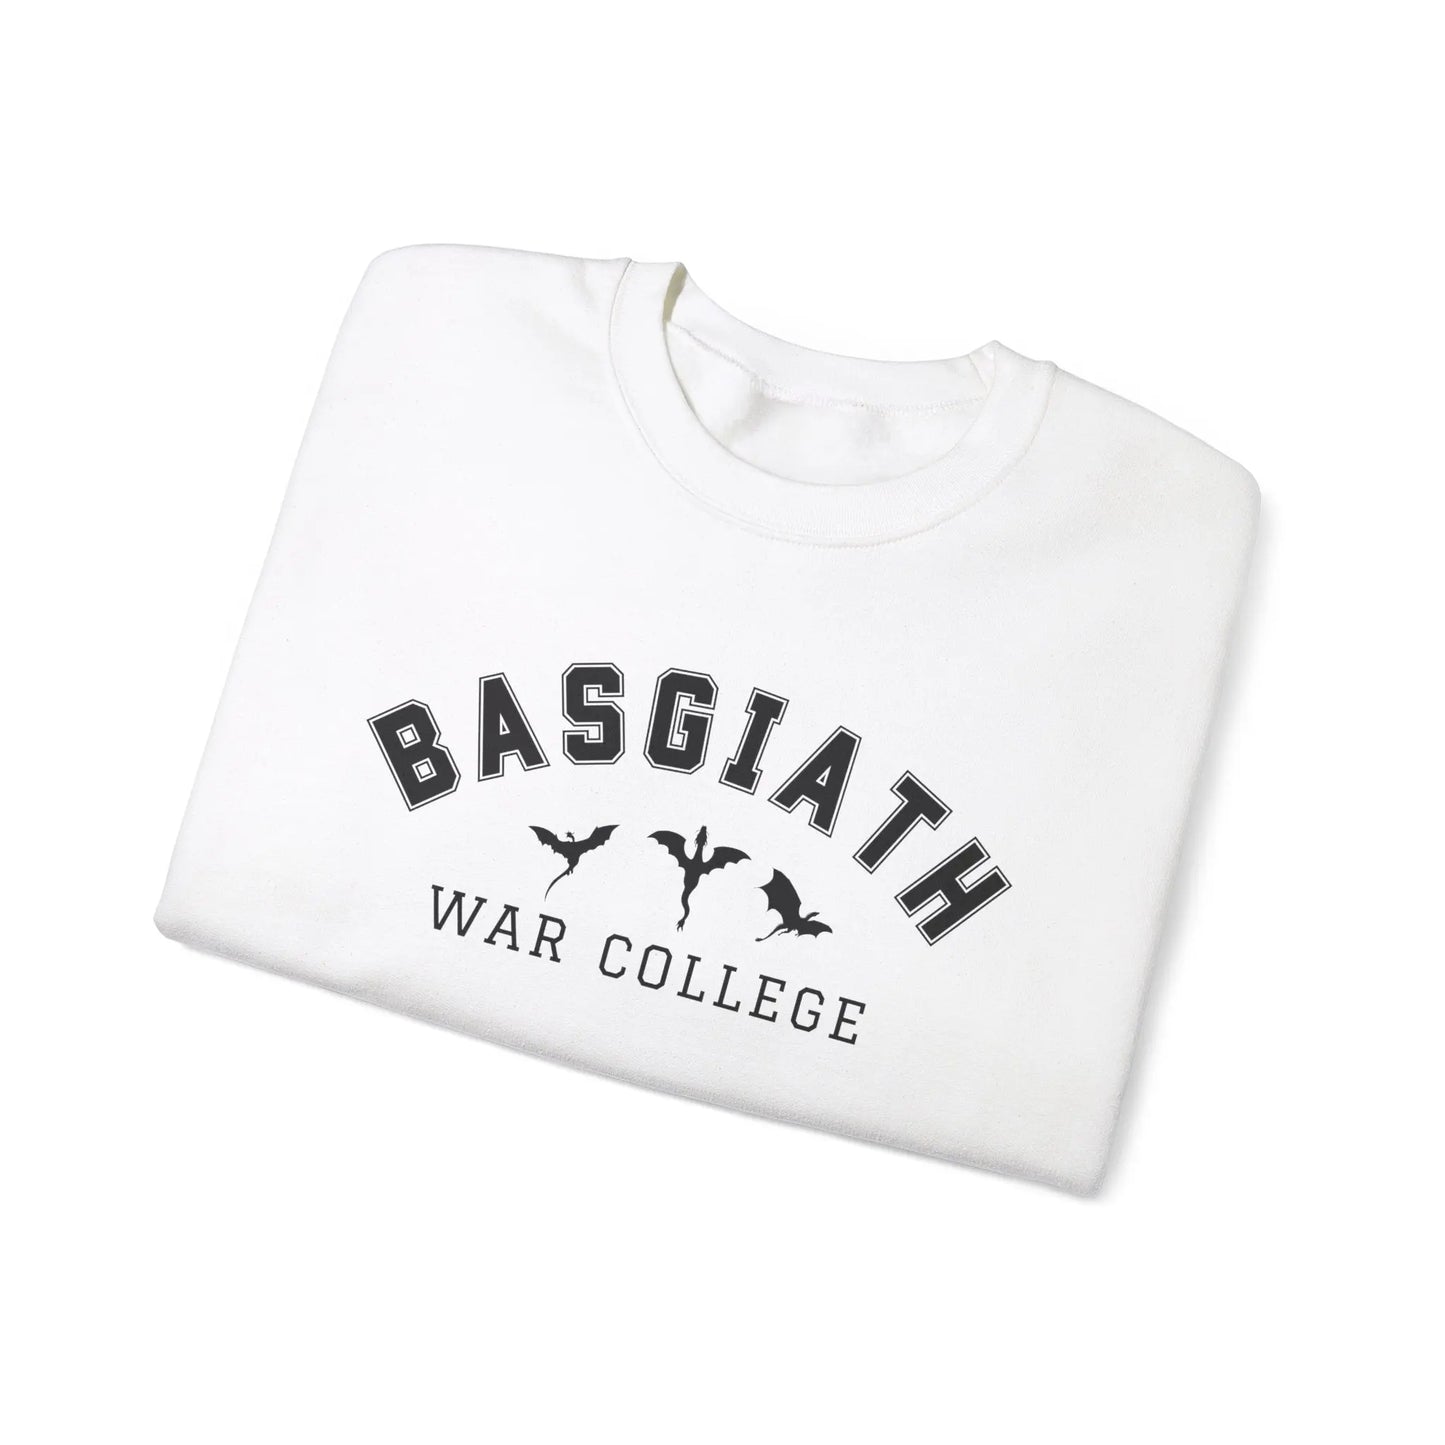 Basgiath War College Fourth Wing Sweatshirt | Inspired by Fourth Wing and Iron Flame by Rebecca Yarros - Stay Tomorrow Needs You